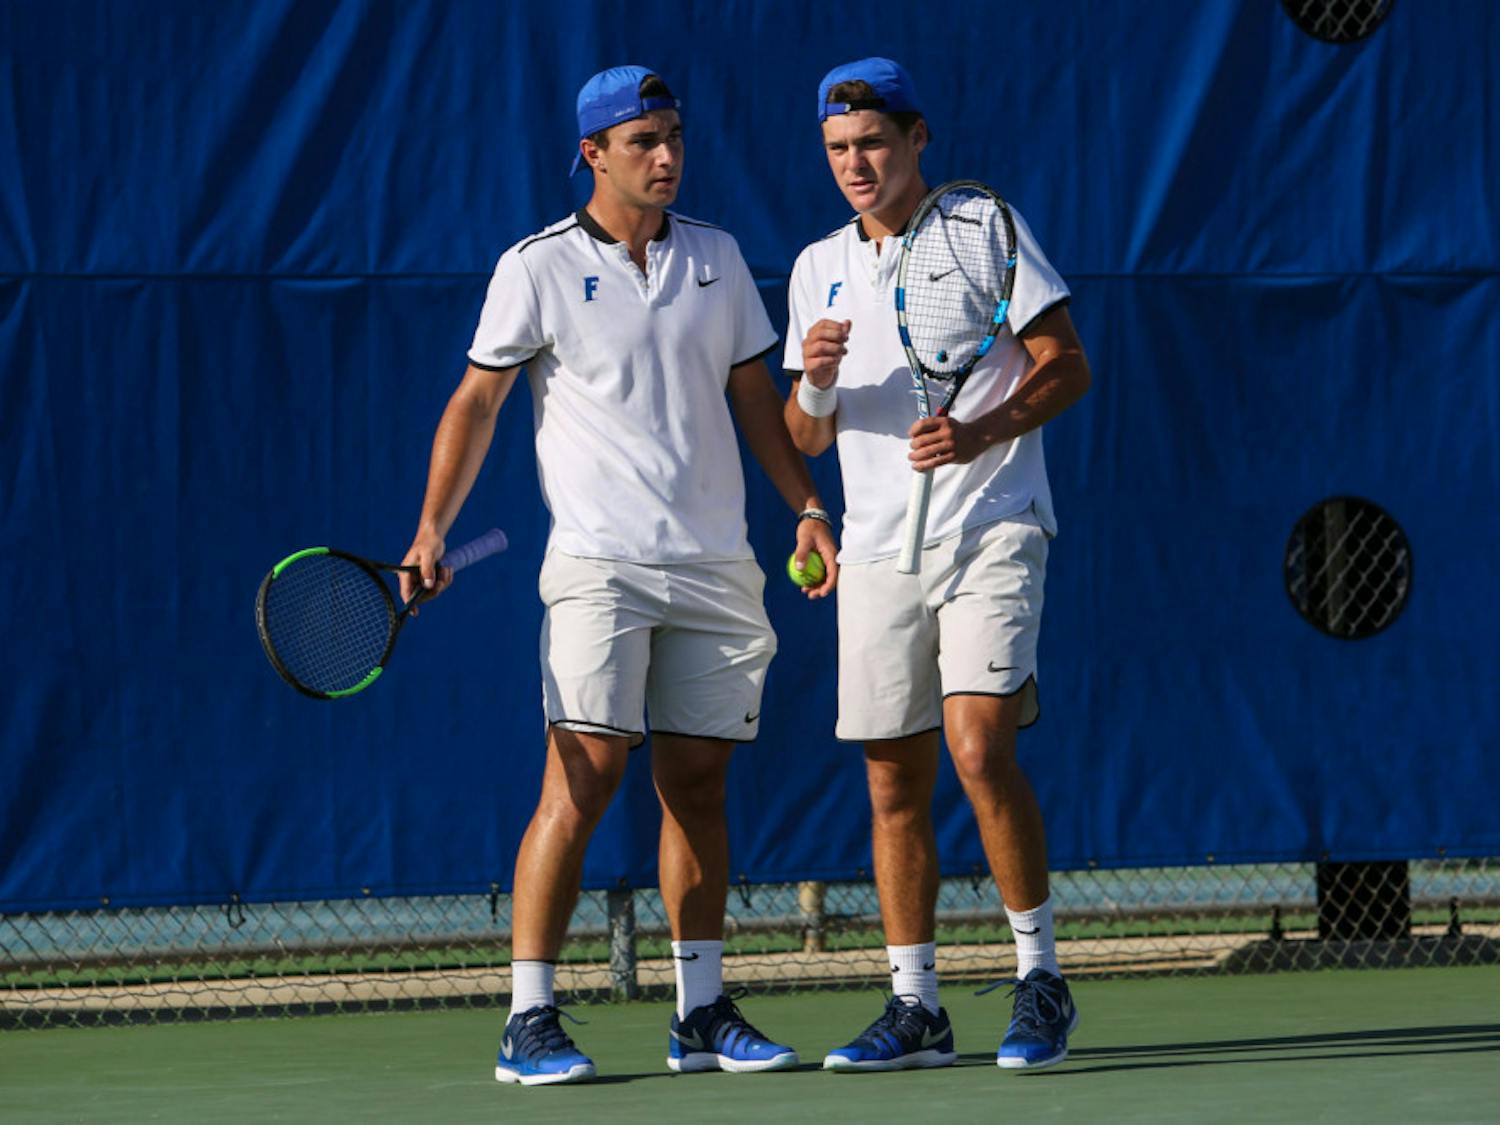 The doubles duo of junior McClain Kessler (right) and Duarte Vale (left) dropped it's NCAA quarterfinals matchup against Ohio State's&nbsp;Martin Joyce and&nbsp;Mikael Torpegaard, 6-3, 6-2. Florida's season ended with the doubles defeat.&nbsp;